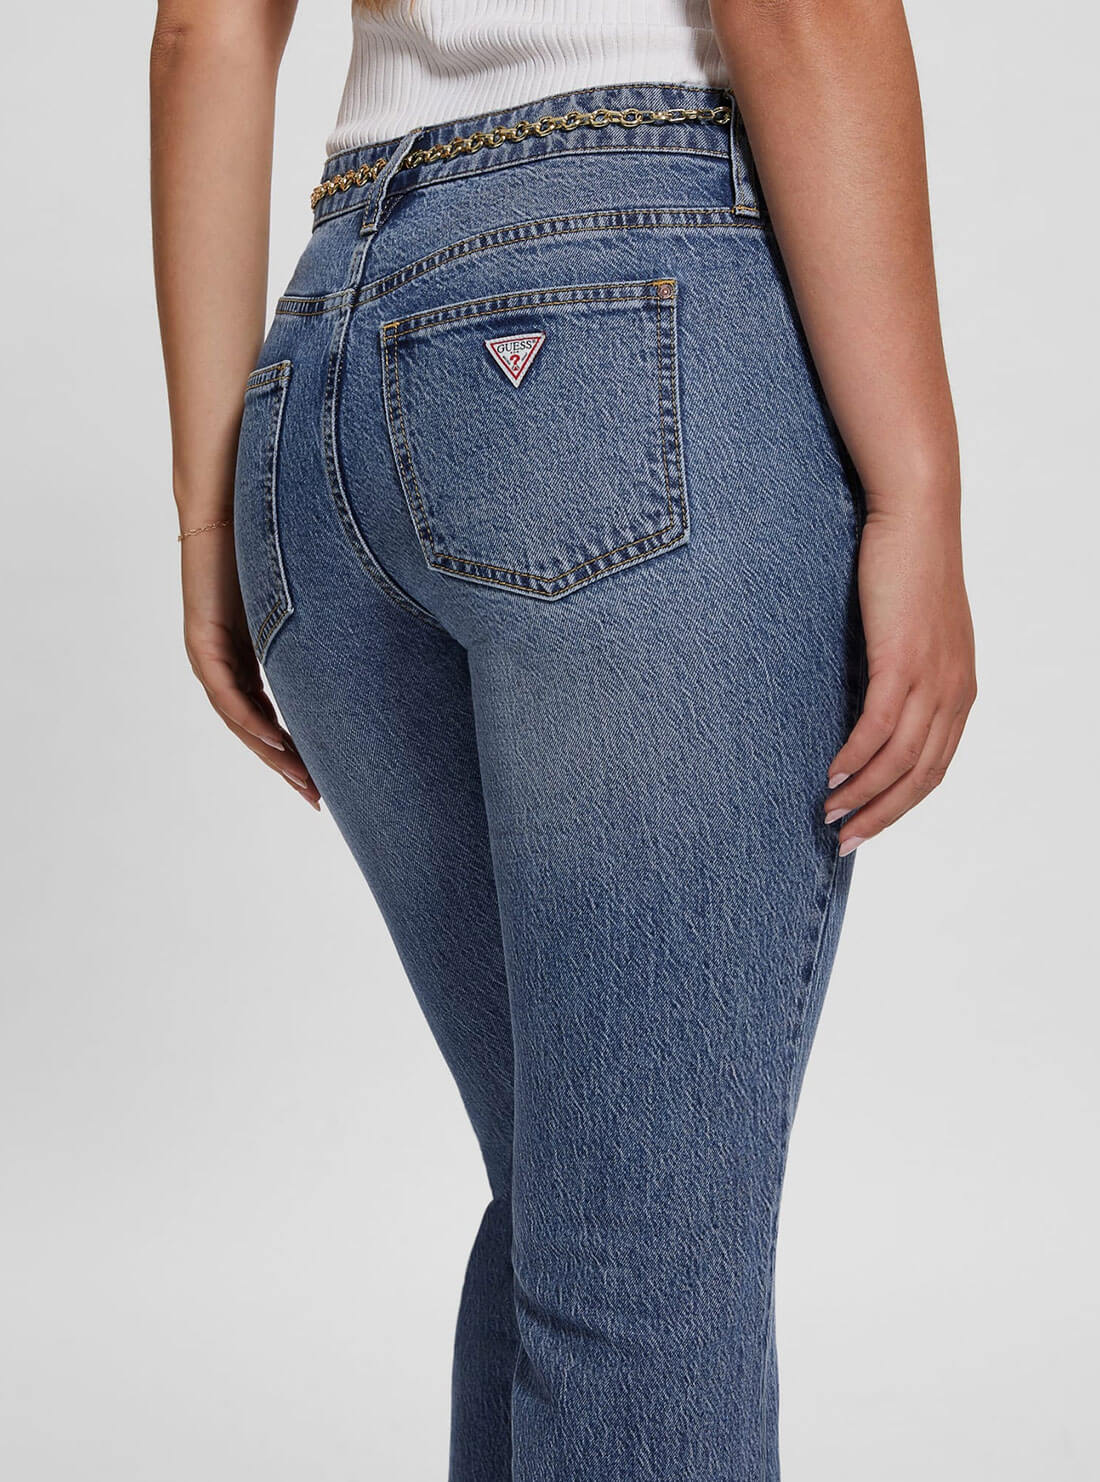 Mid-Rise G-Belt Sexy Straight Leg Denim Jeans In Lunar Blue Wash | GUESS Women's Apparel | back view detail 